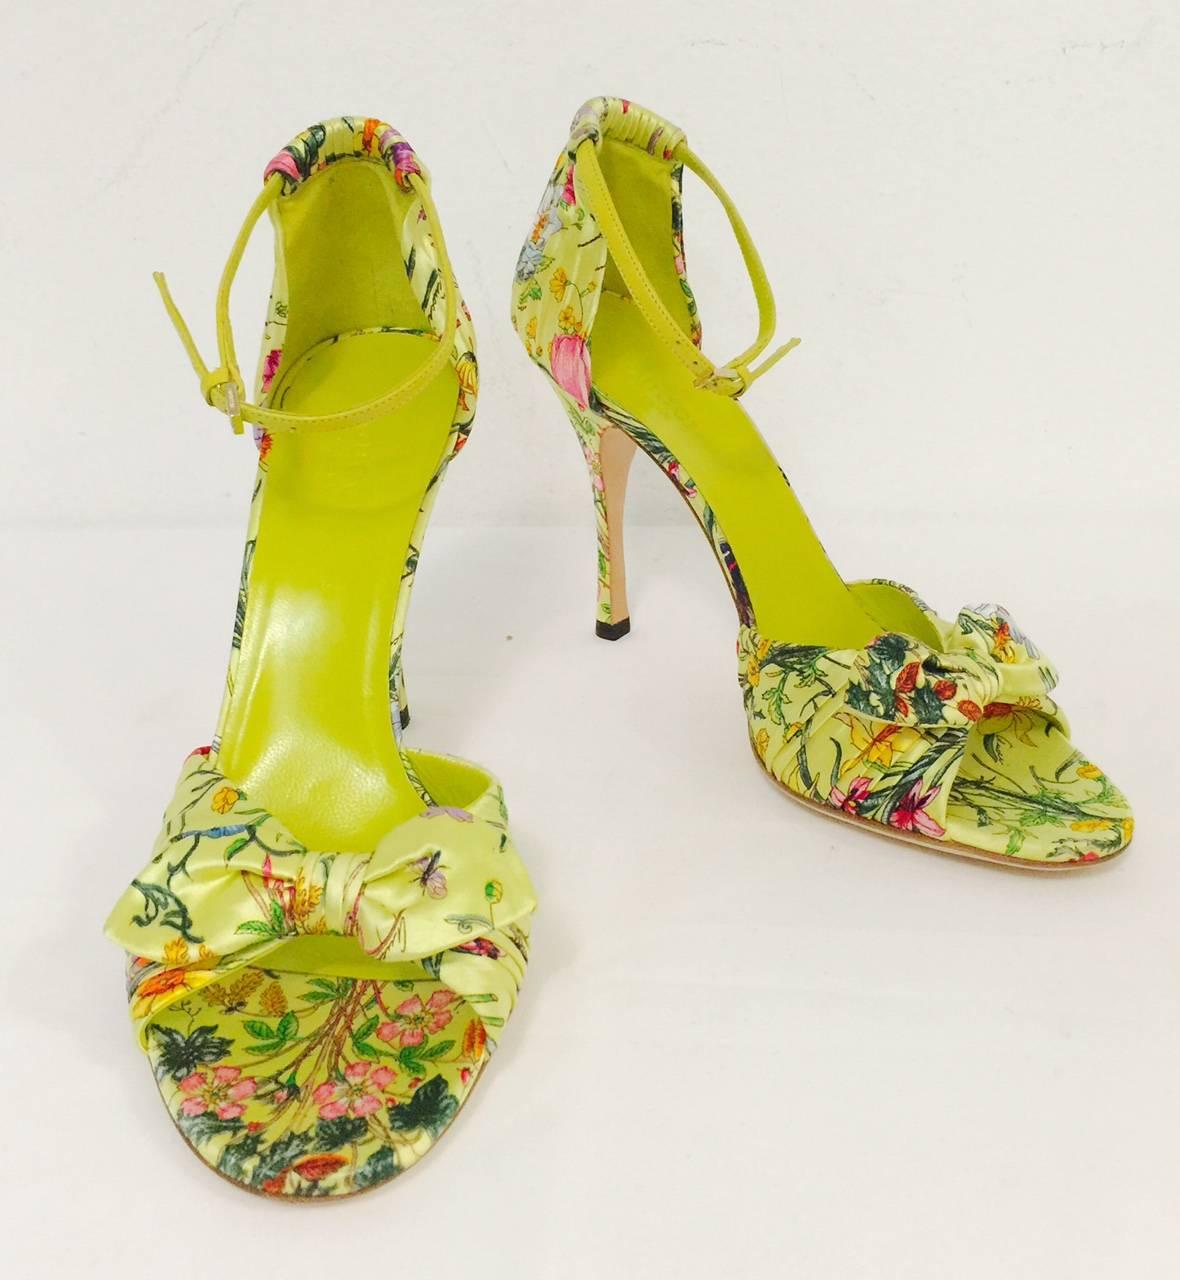 Gucci Green Satin Floral Print High Heel Sandals are Above Excellent to New!  Features an undeniably alluring floral print all over in ultra-luxurious satin (including heels!) in shades of glorious green from chartreuse to Spanish olive to leaf. 